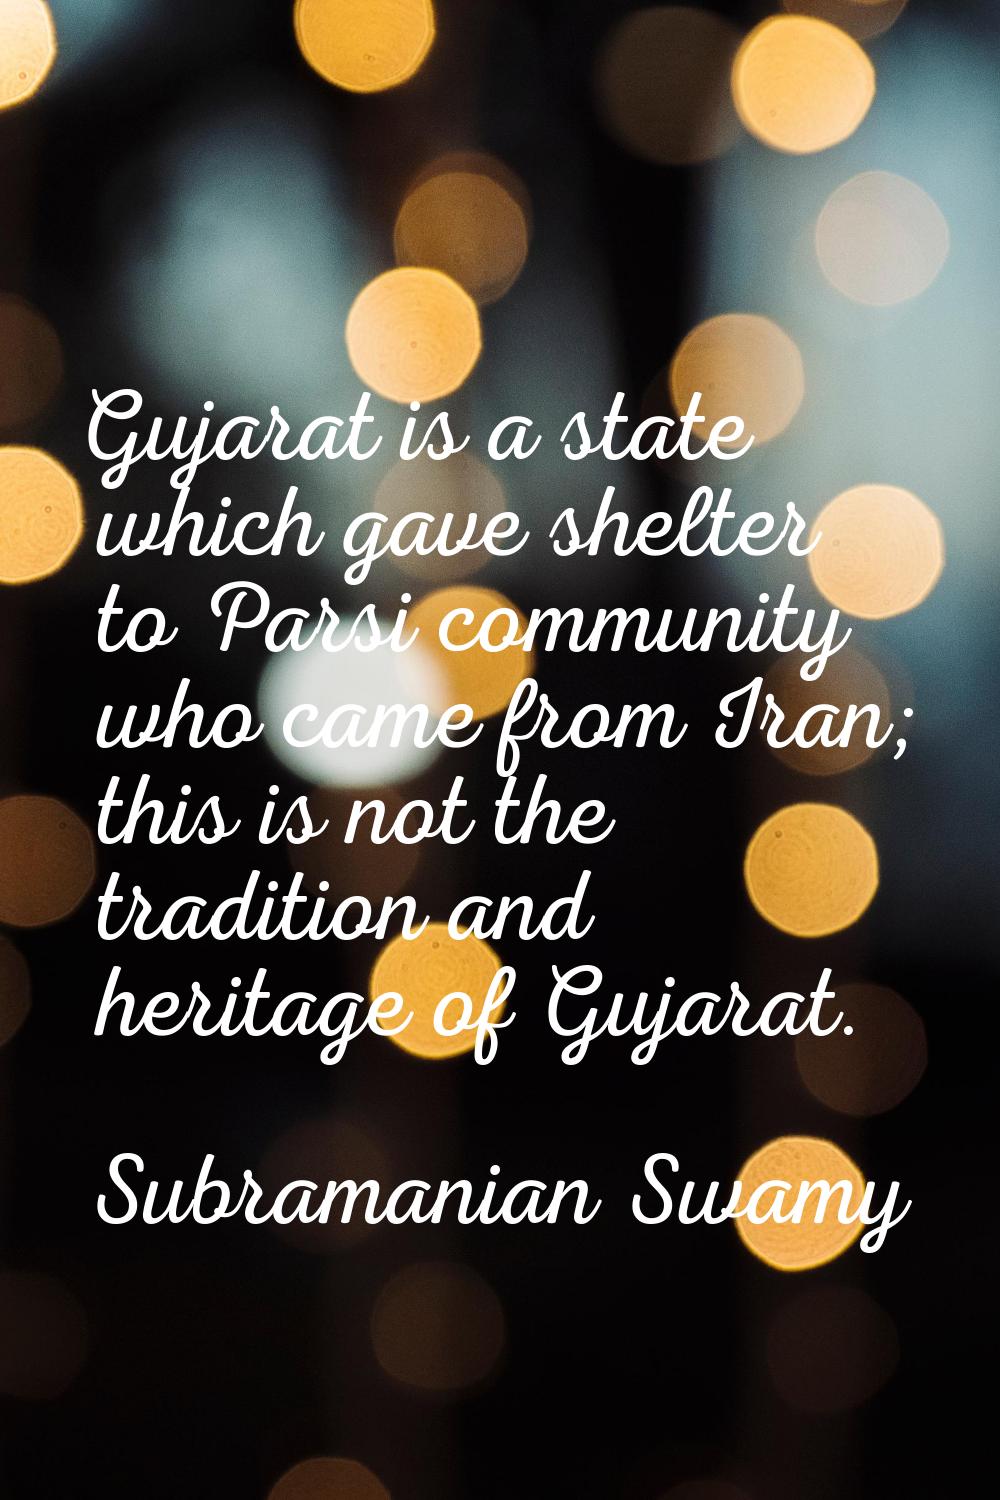 Gujarat is a state which gave shelter to Parsi community who came from Iran; this is not the tradit